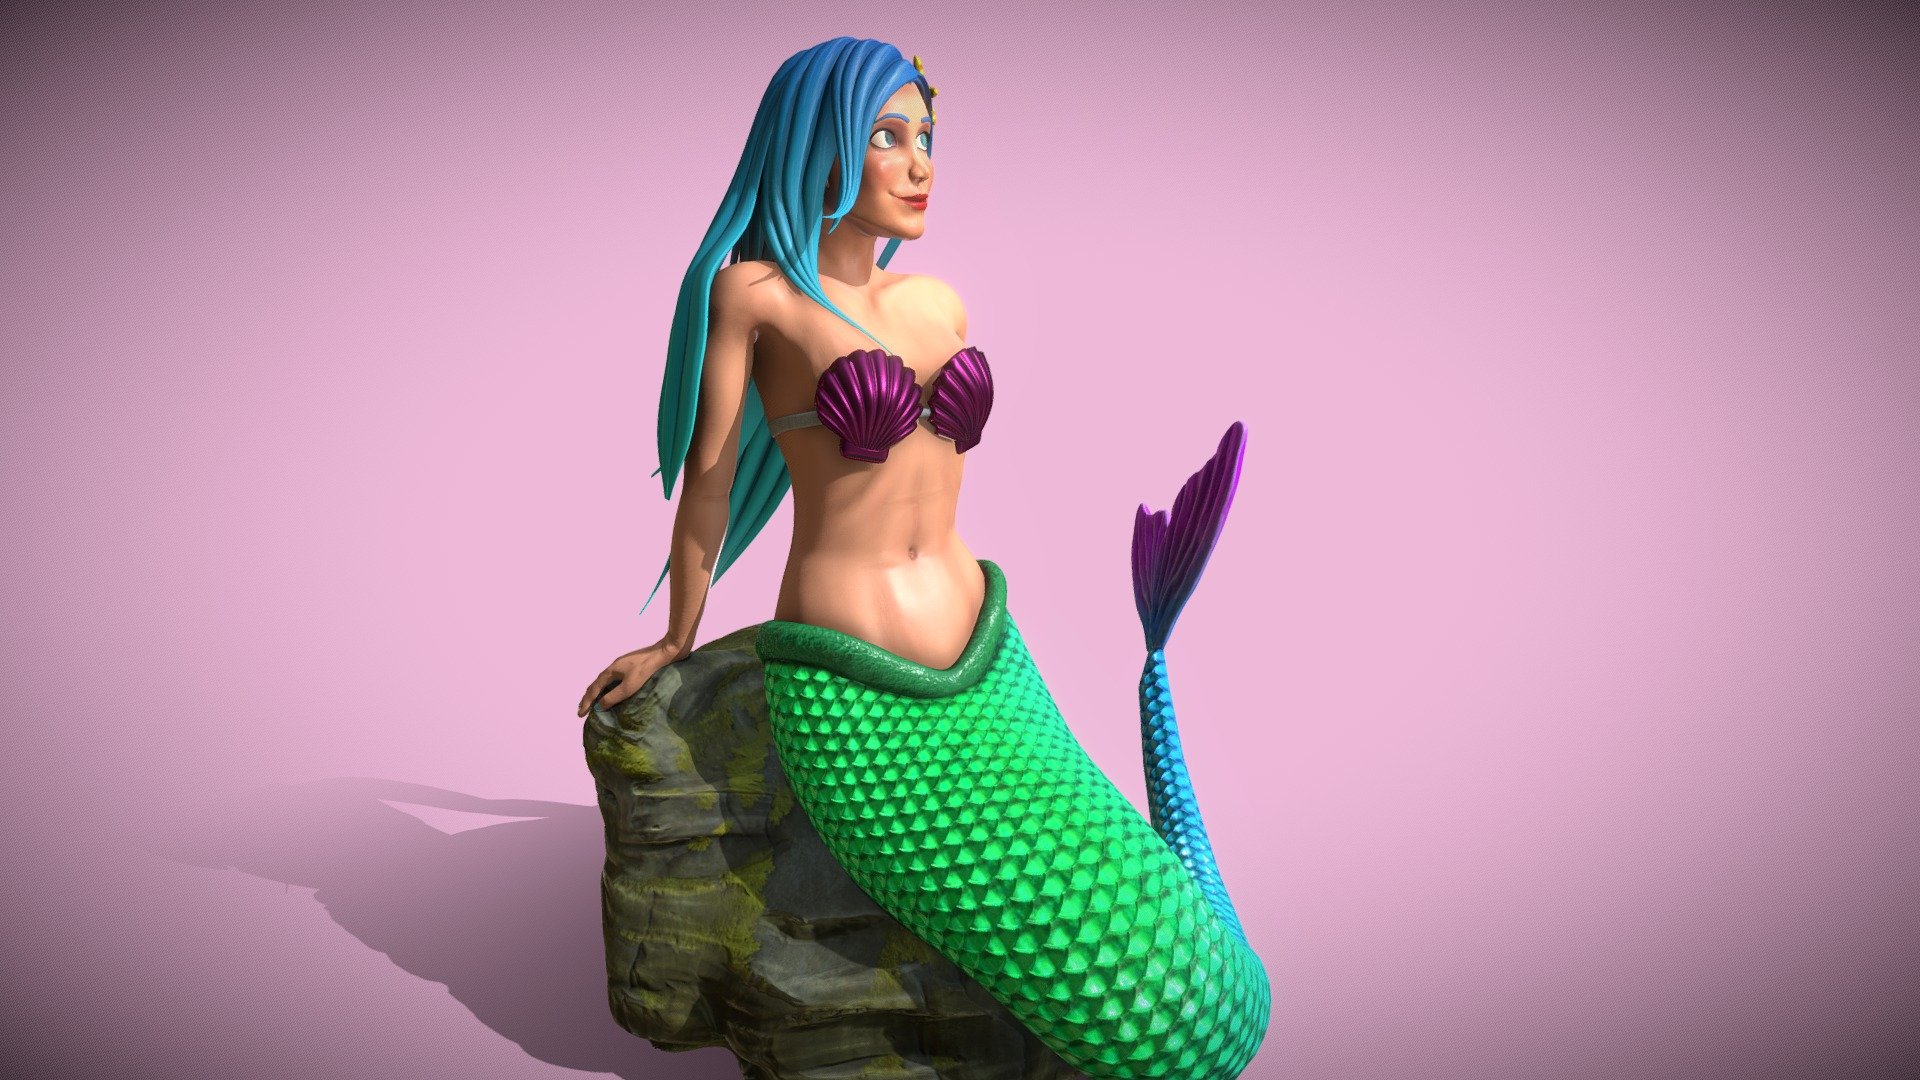 This is a sculpt of a mermaid that I did for practice and for fun. 

Sculpted &amp; modeled in Blender 2.9 and painted in Substance Painter 3d model